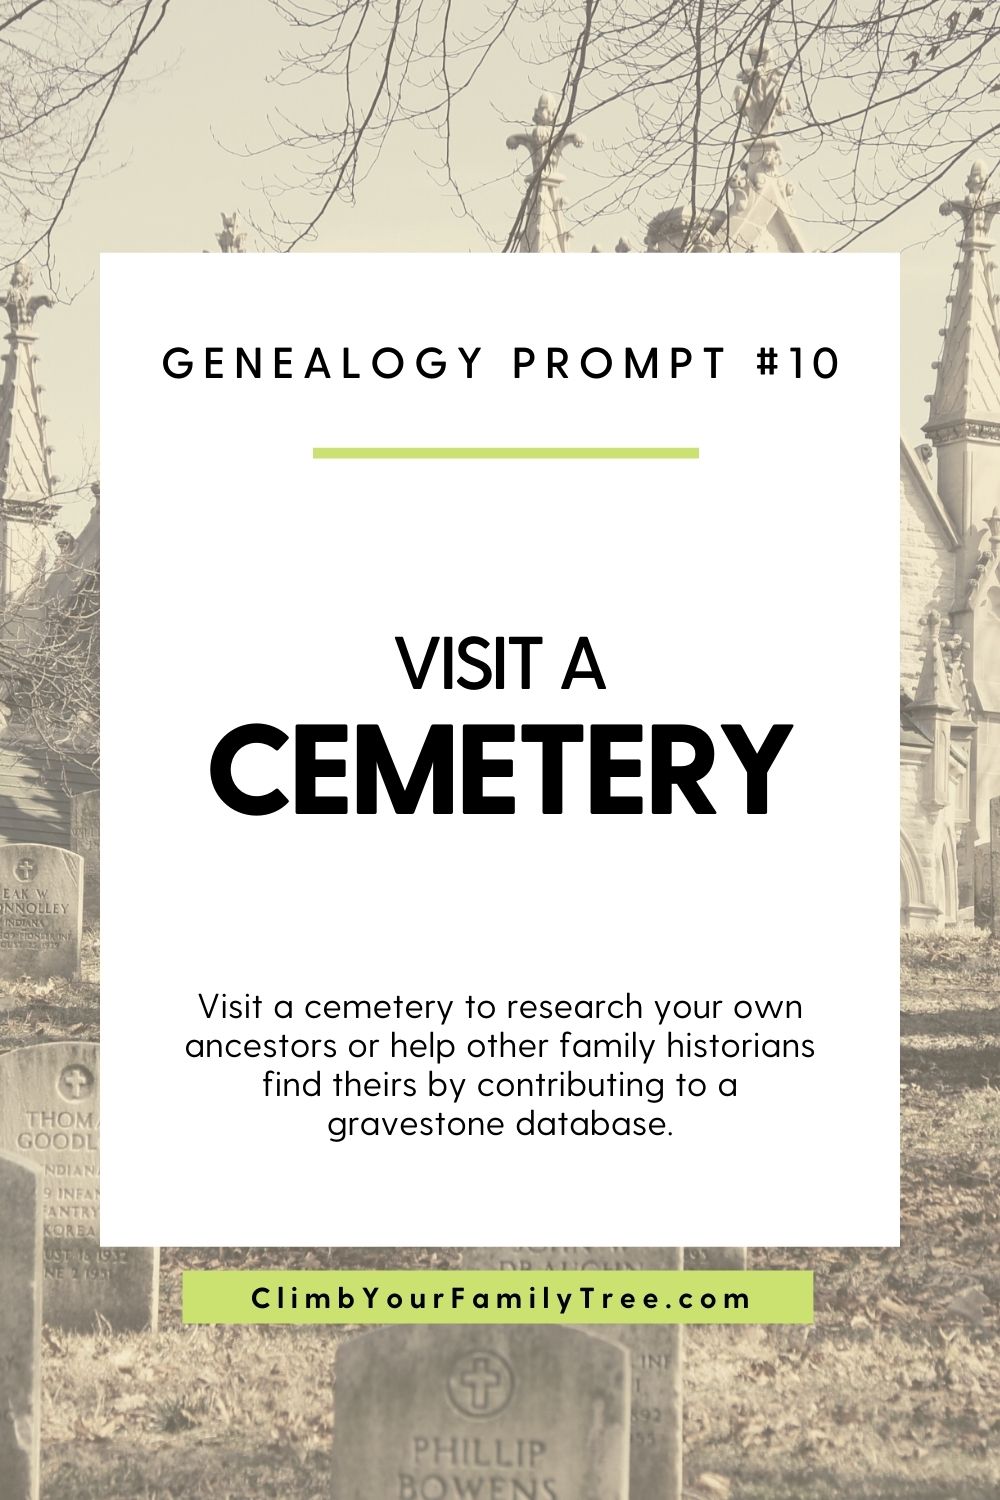 Genealogy Prompt 10 - Visit a Cemetery - Visit a cemetery to research your own ancestors or help other family historians find theirs by contributing to a gravestone database. - ClimbYourFamilyTree.com